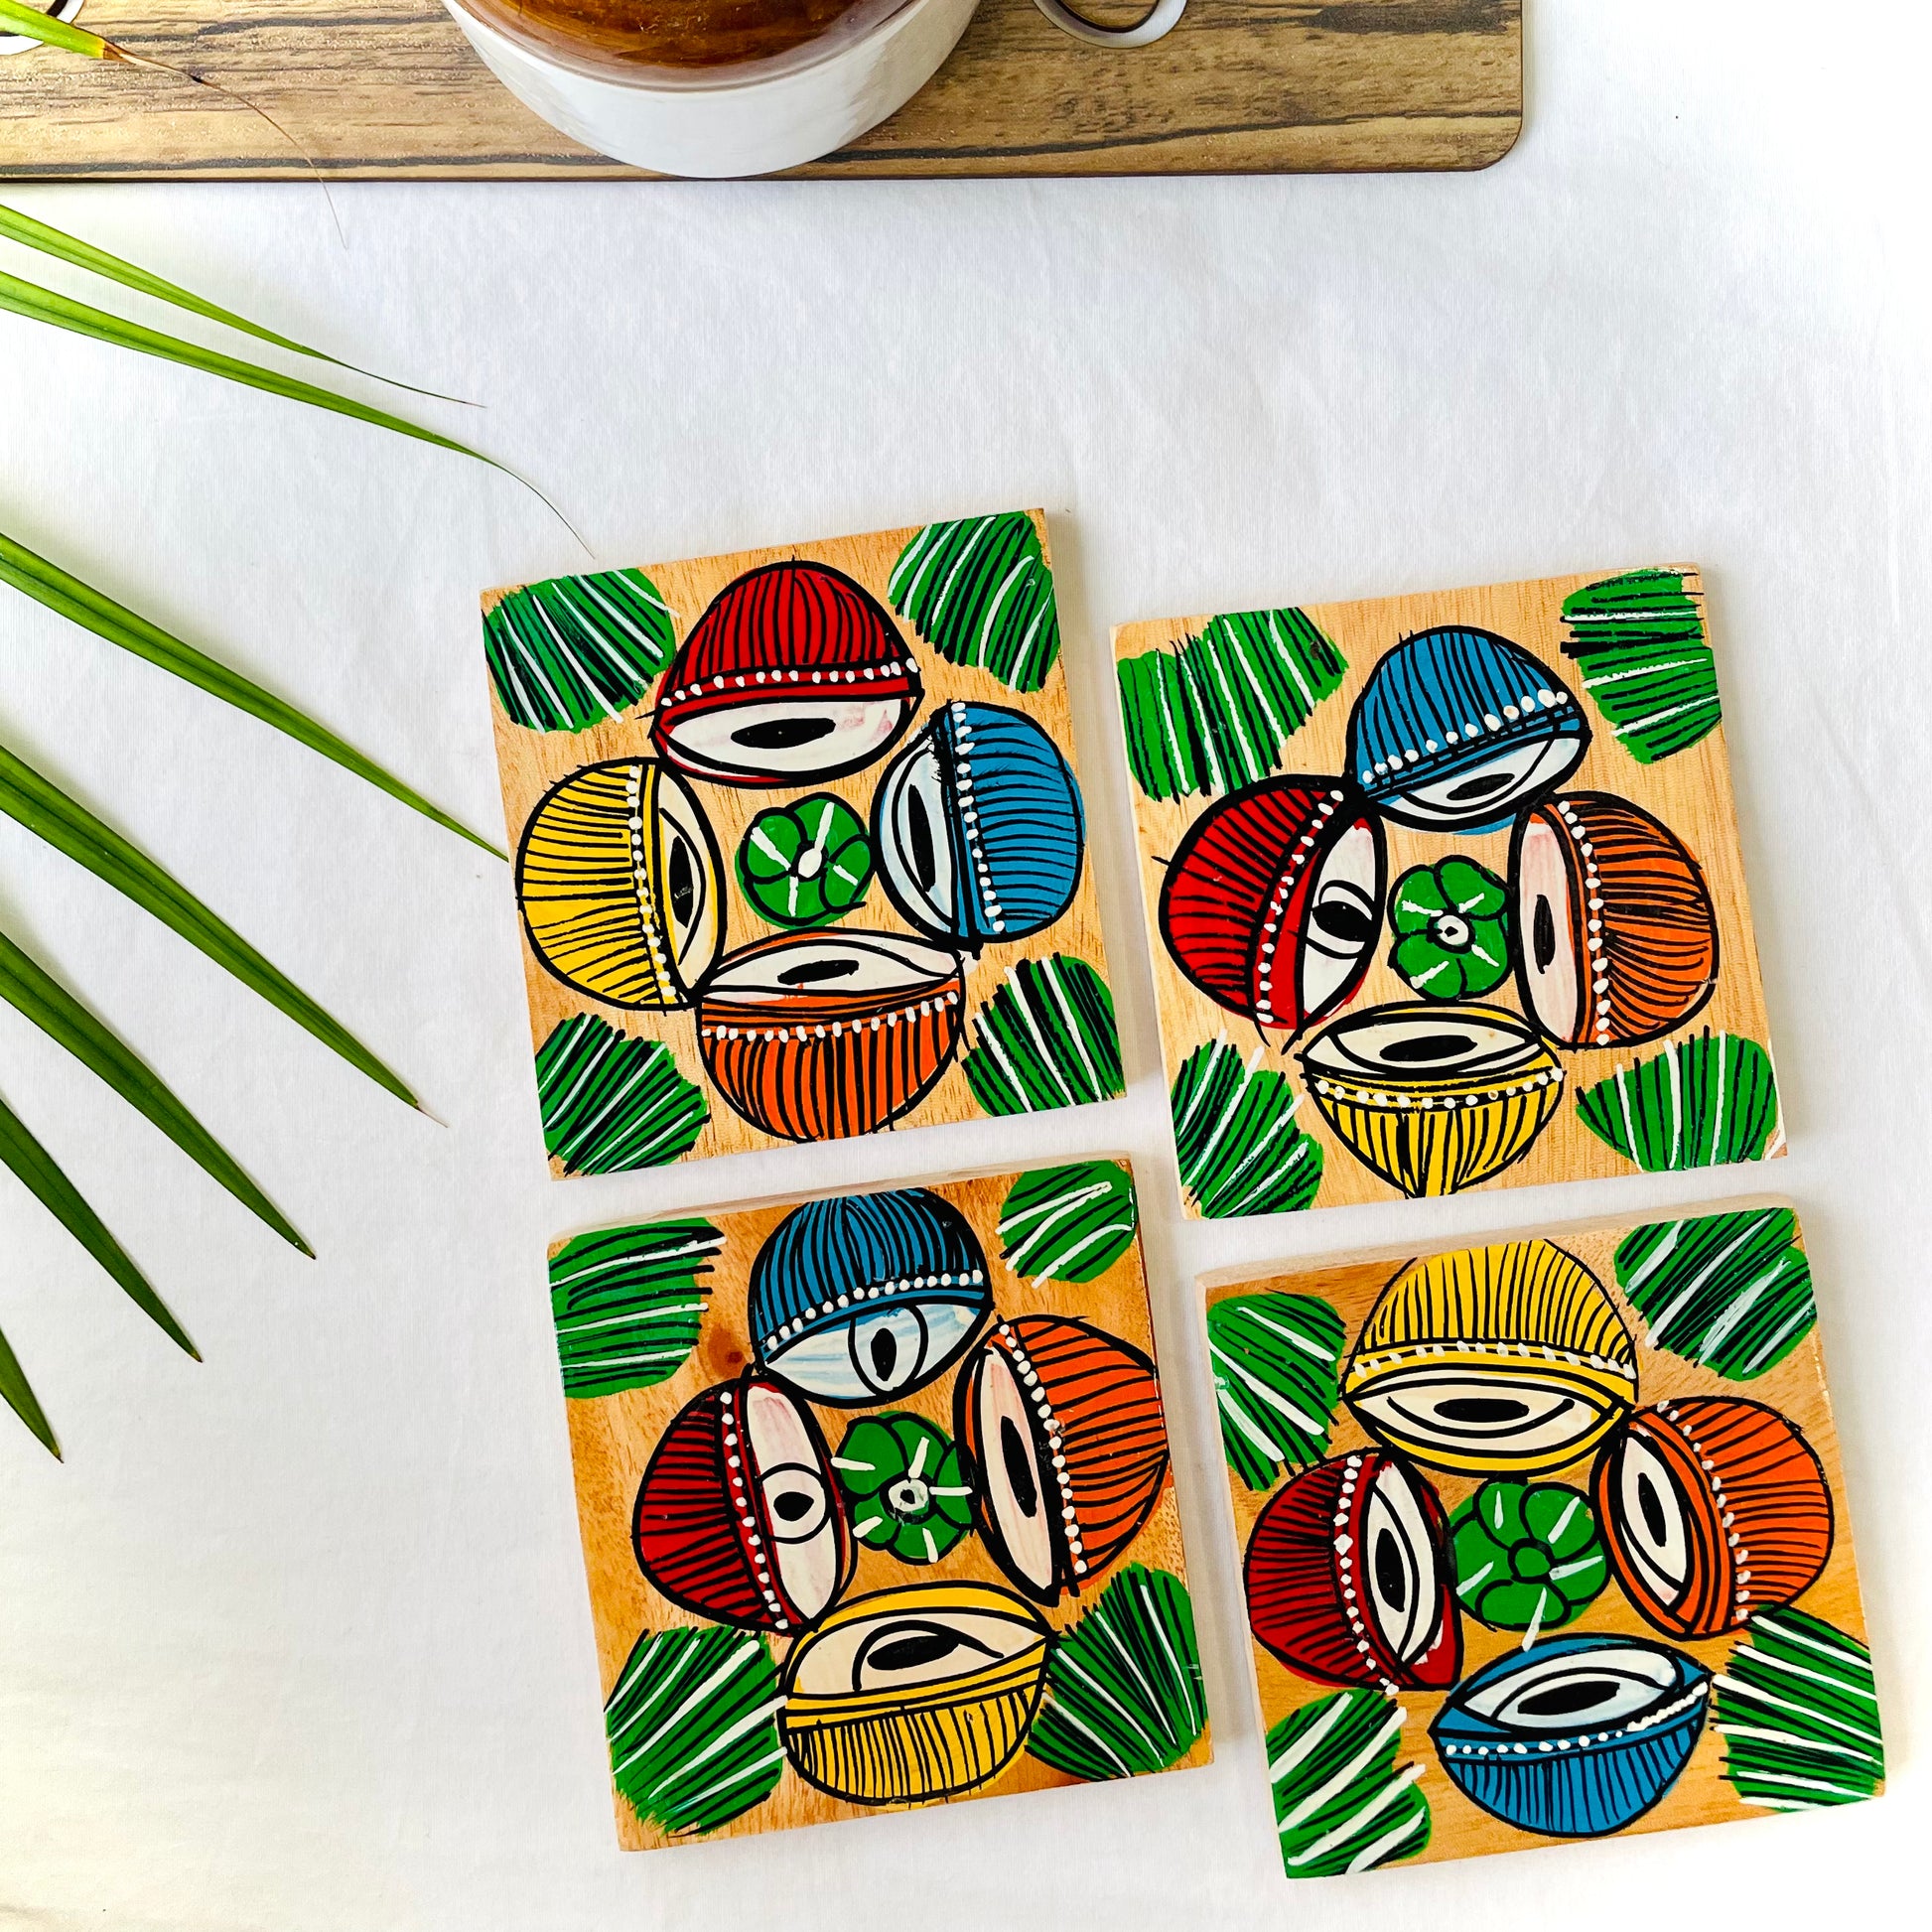 Alokya - 100% natural, Pattachitra painted terracotta coasters  - Square coasters: Tabla painted on the surface. Set of four.